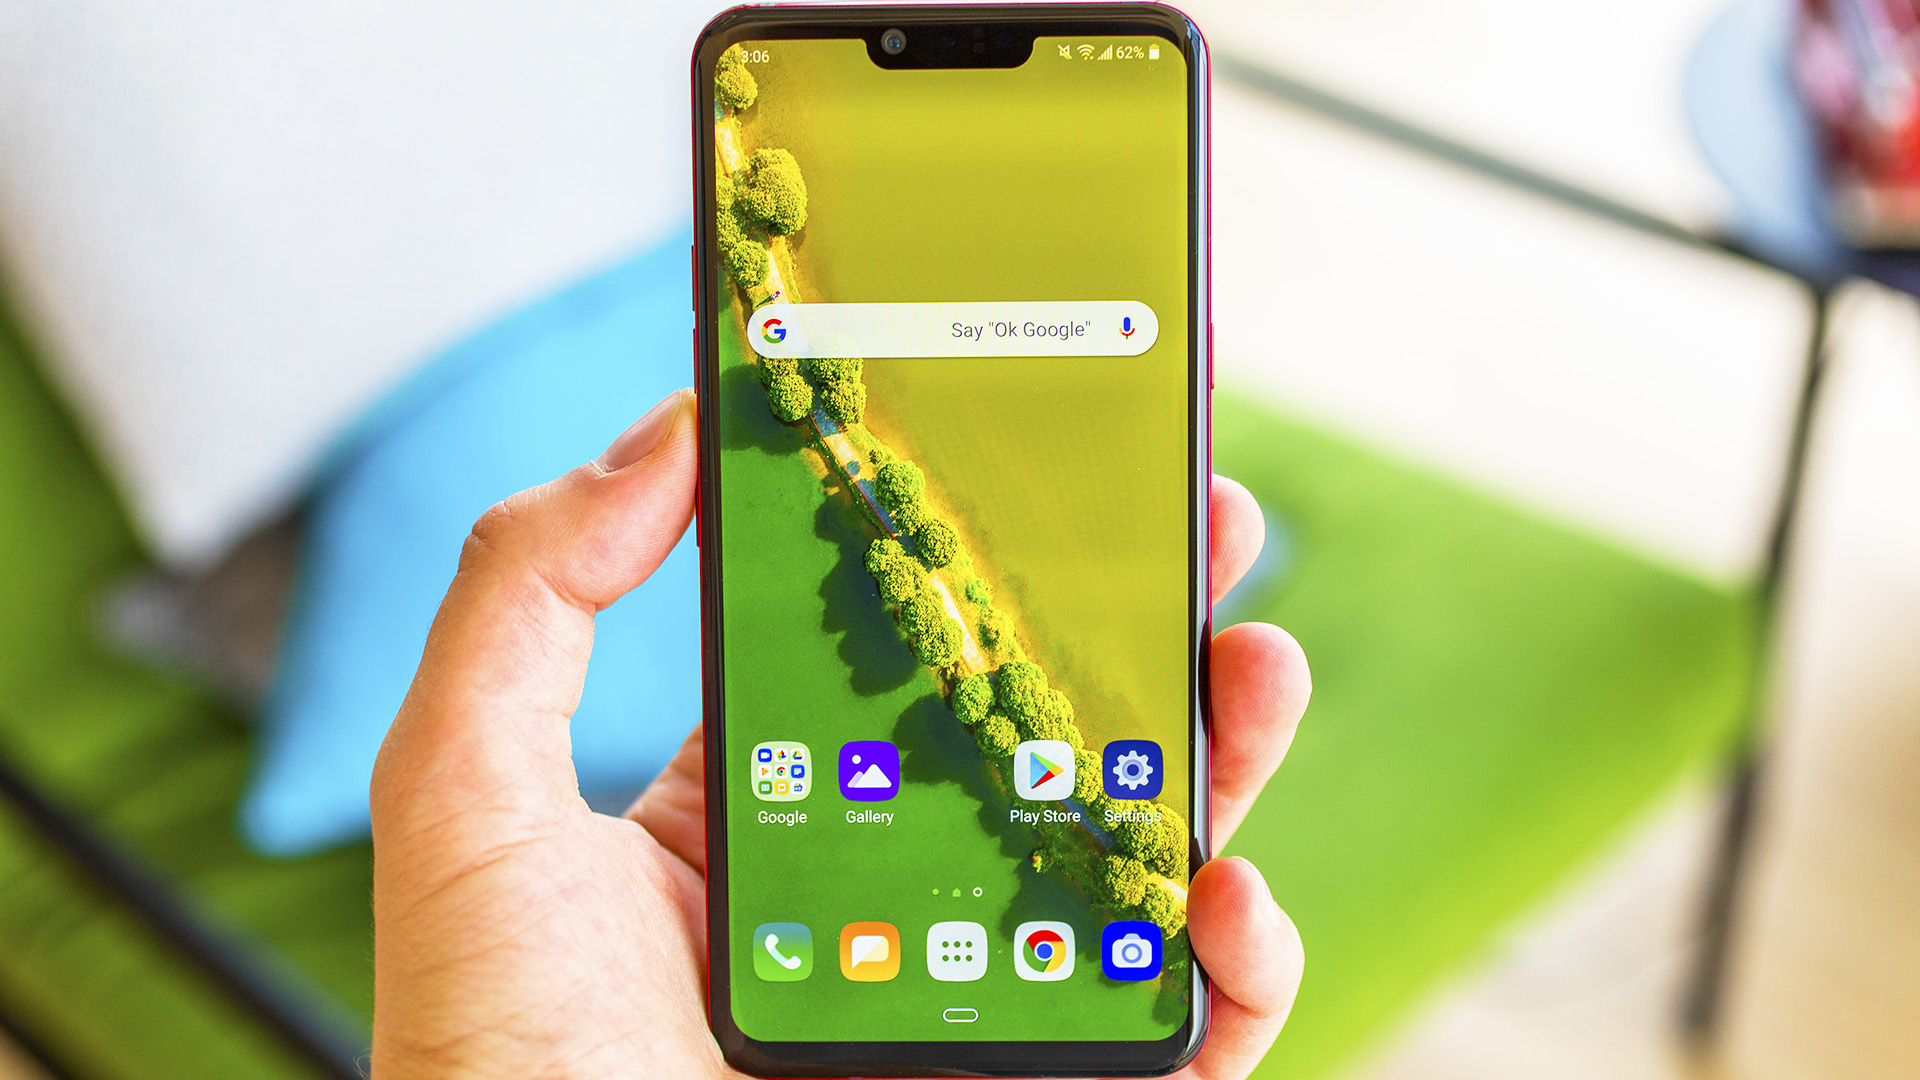 LG G8 ThinQ Android 10 update comes to the USA